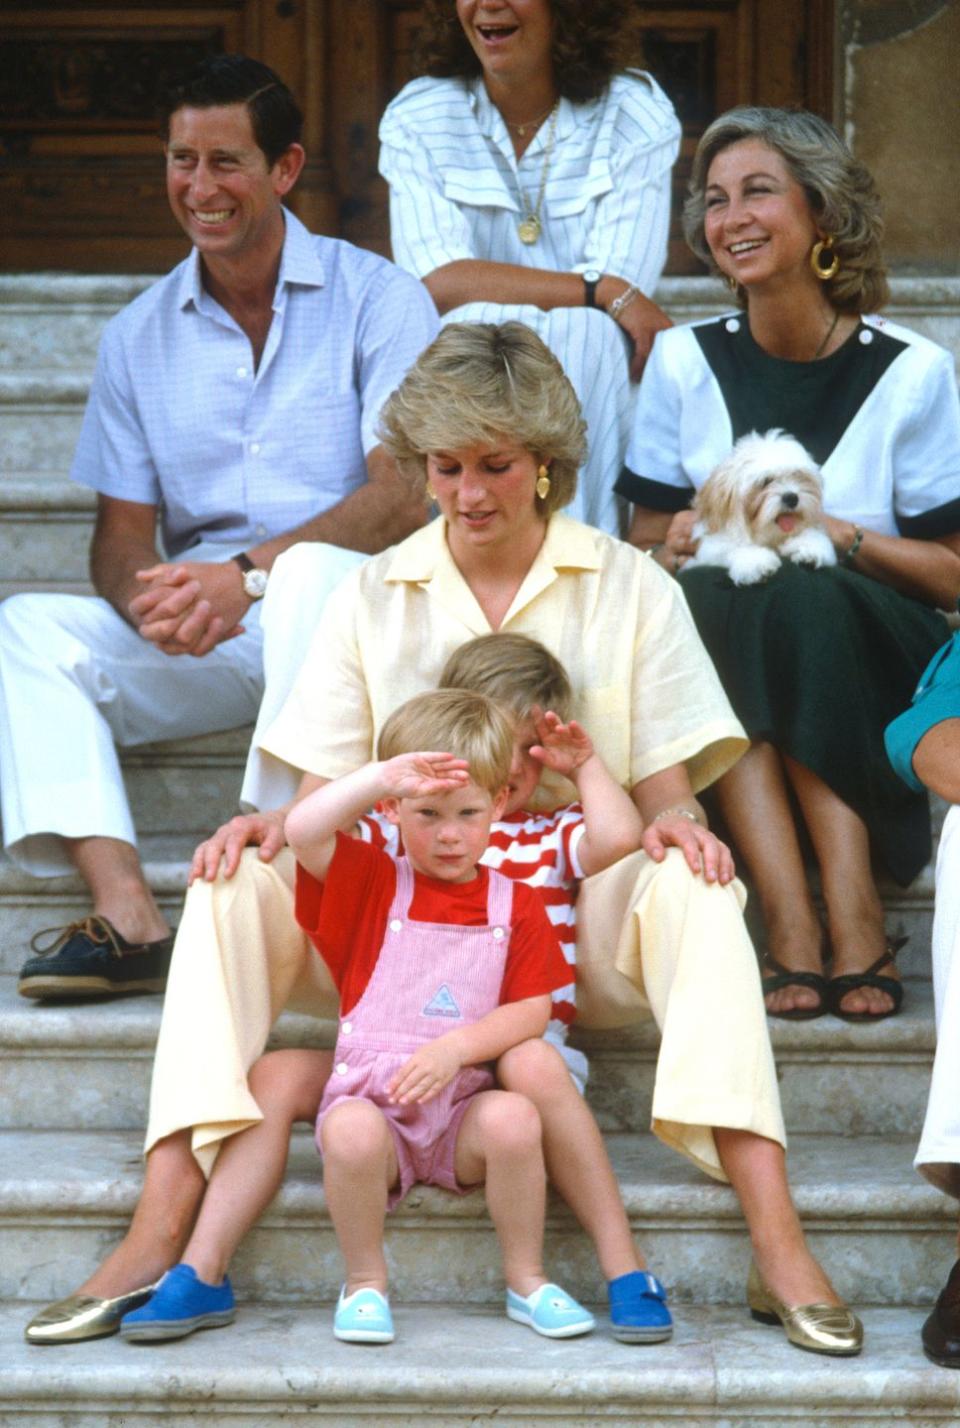 palma, majorca august 10 prince charles, prince of wales, diana, princess of wales, wearing a yellow jumpsuit, prince william and prince harry sit on the steps of marivent palace with queen sofia of spain and other members of the spanish royal family on august 10, 1987 in palma, majorca photo by anwar husseingetty images